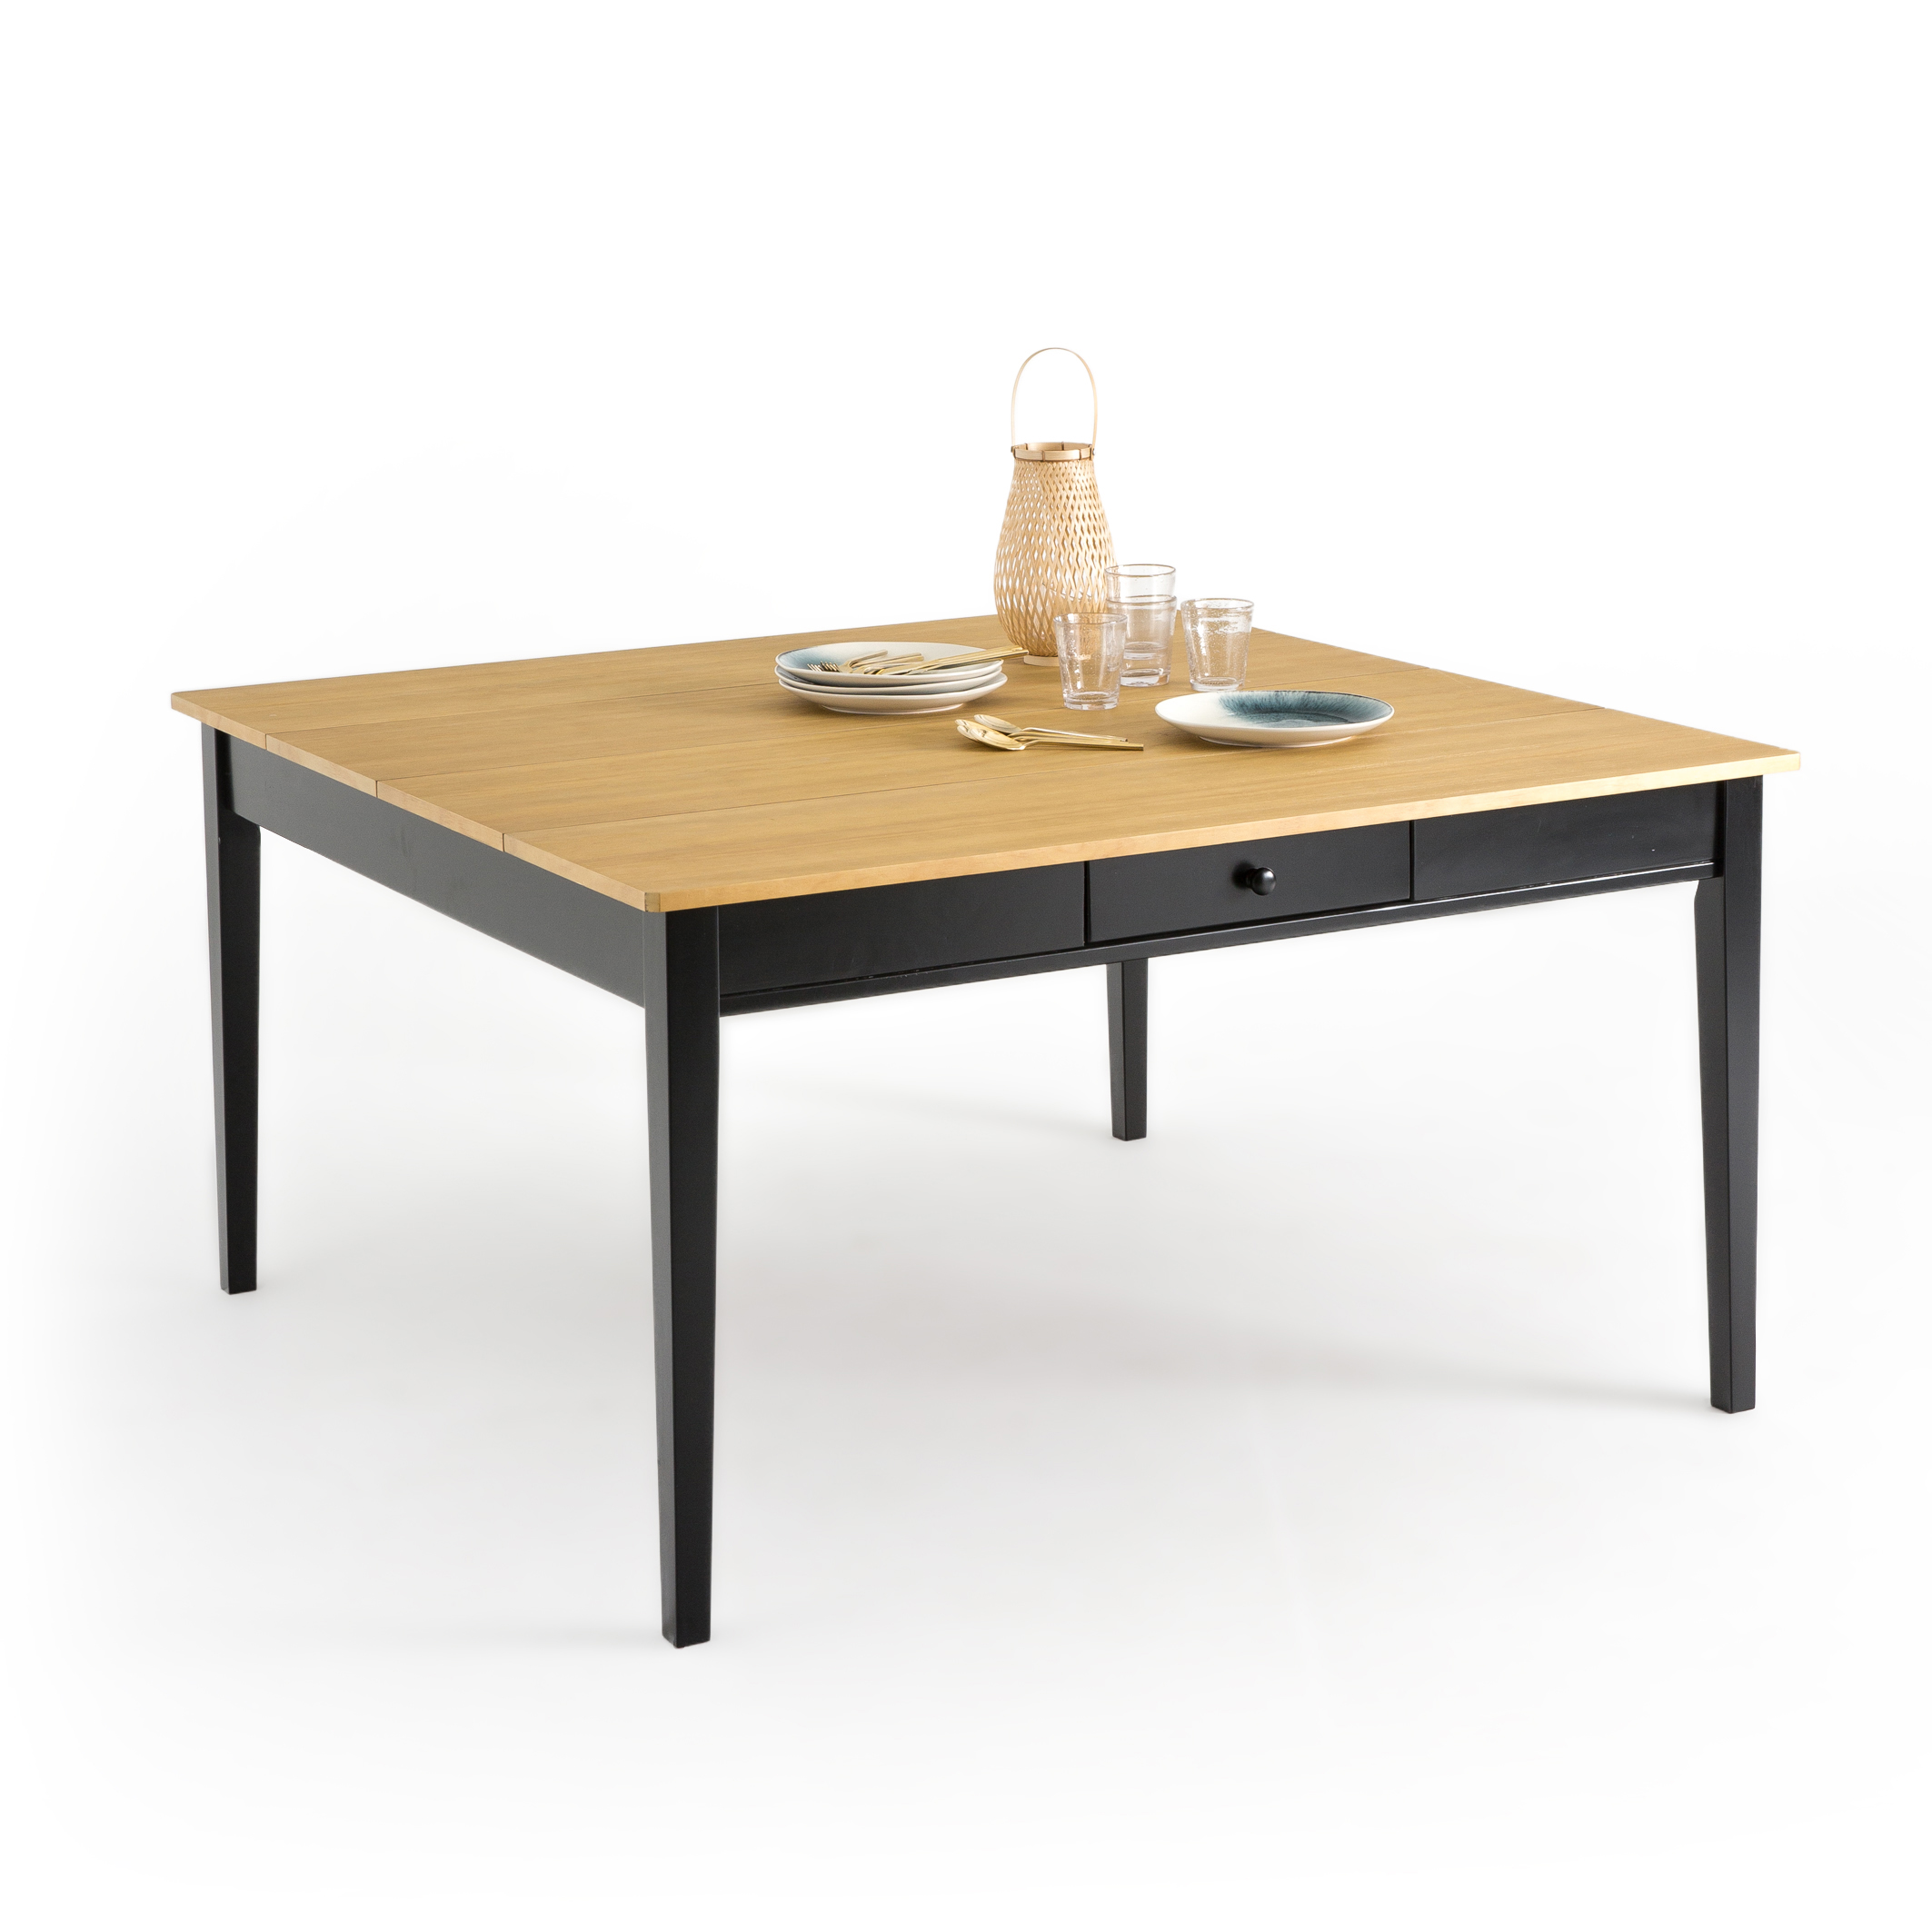 Alvina Dining Table Seats 8 Black La, What Size Of Table Seats 8